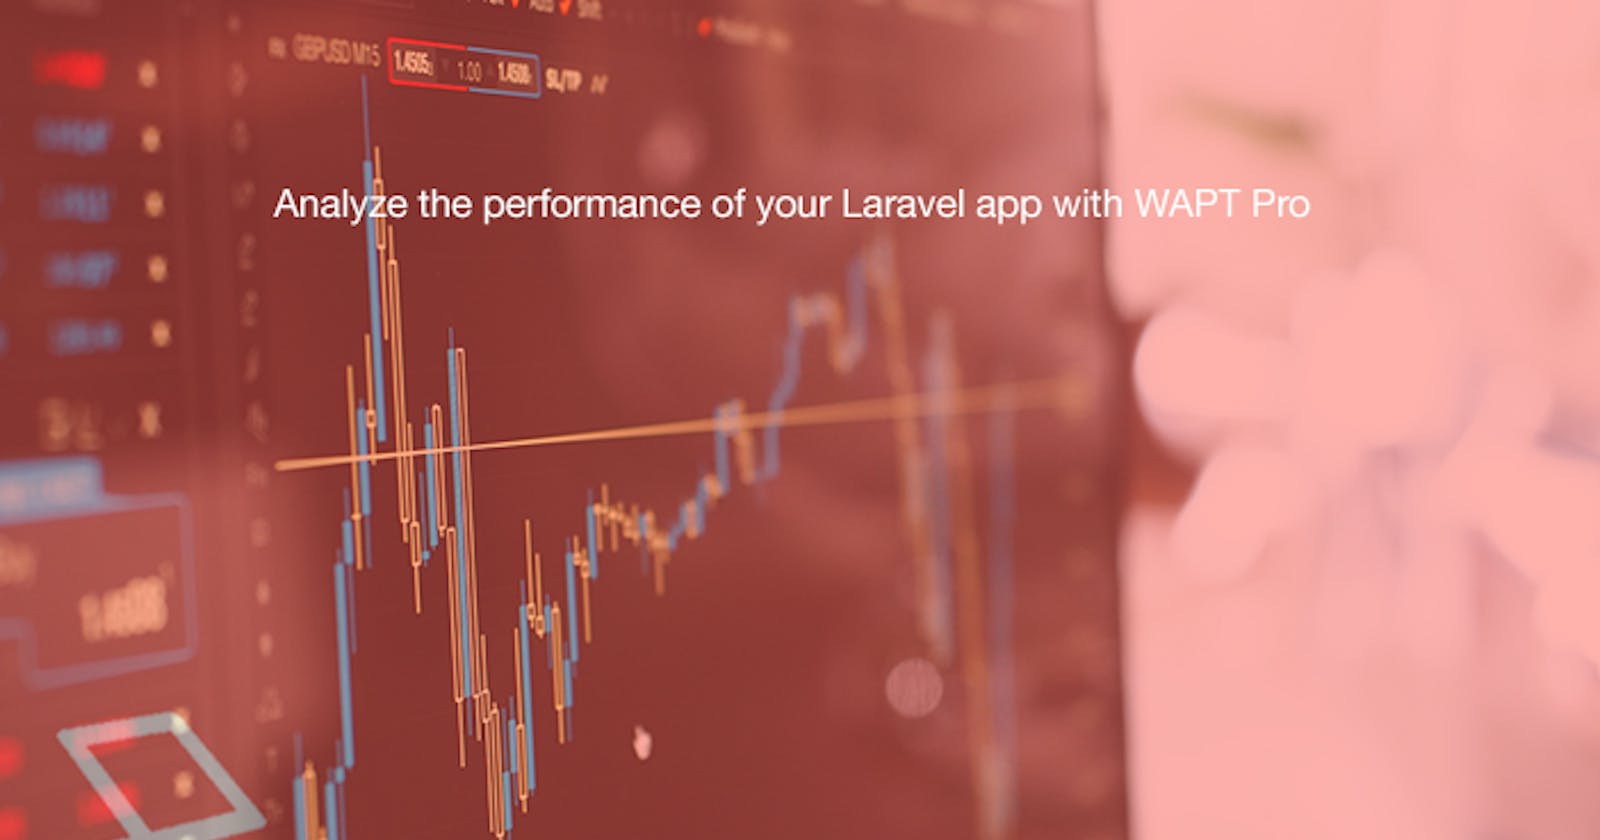 Analyze the performance of your Laravel app with WAPT Pro
